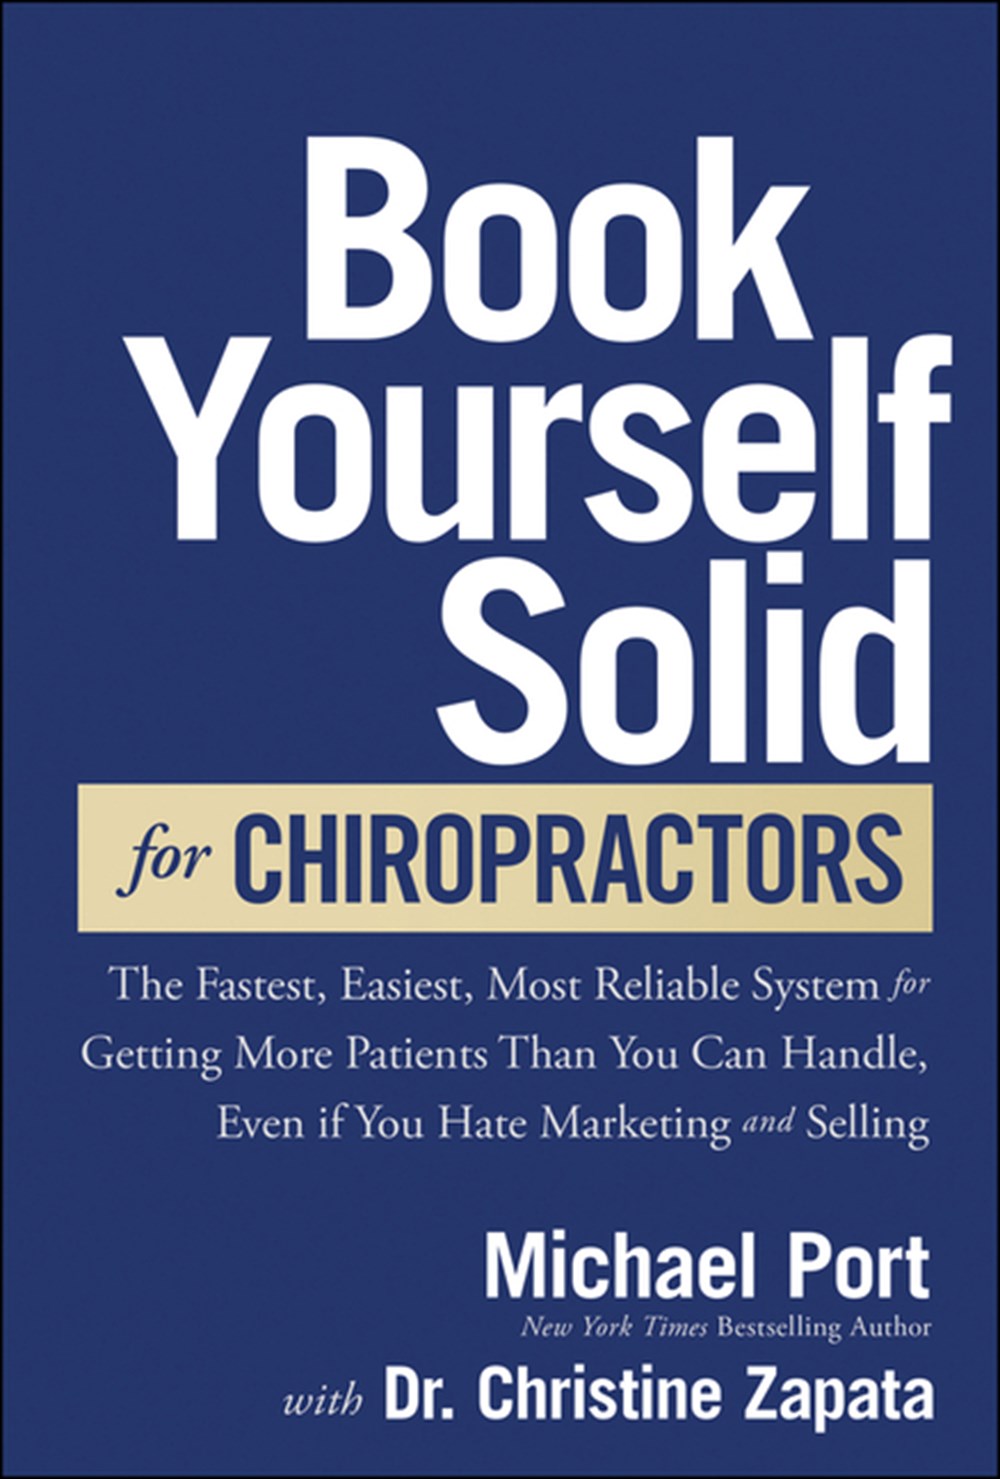 Book Yourself Solid for Chiropractors: The Fastest, Easiest, Most Reliable System for Getting More P